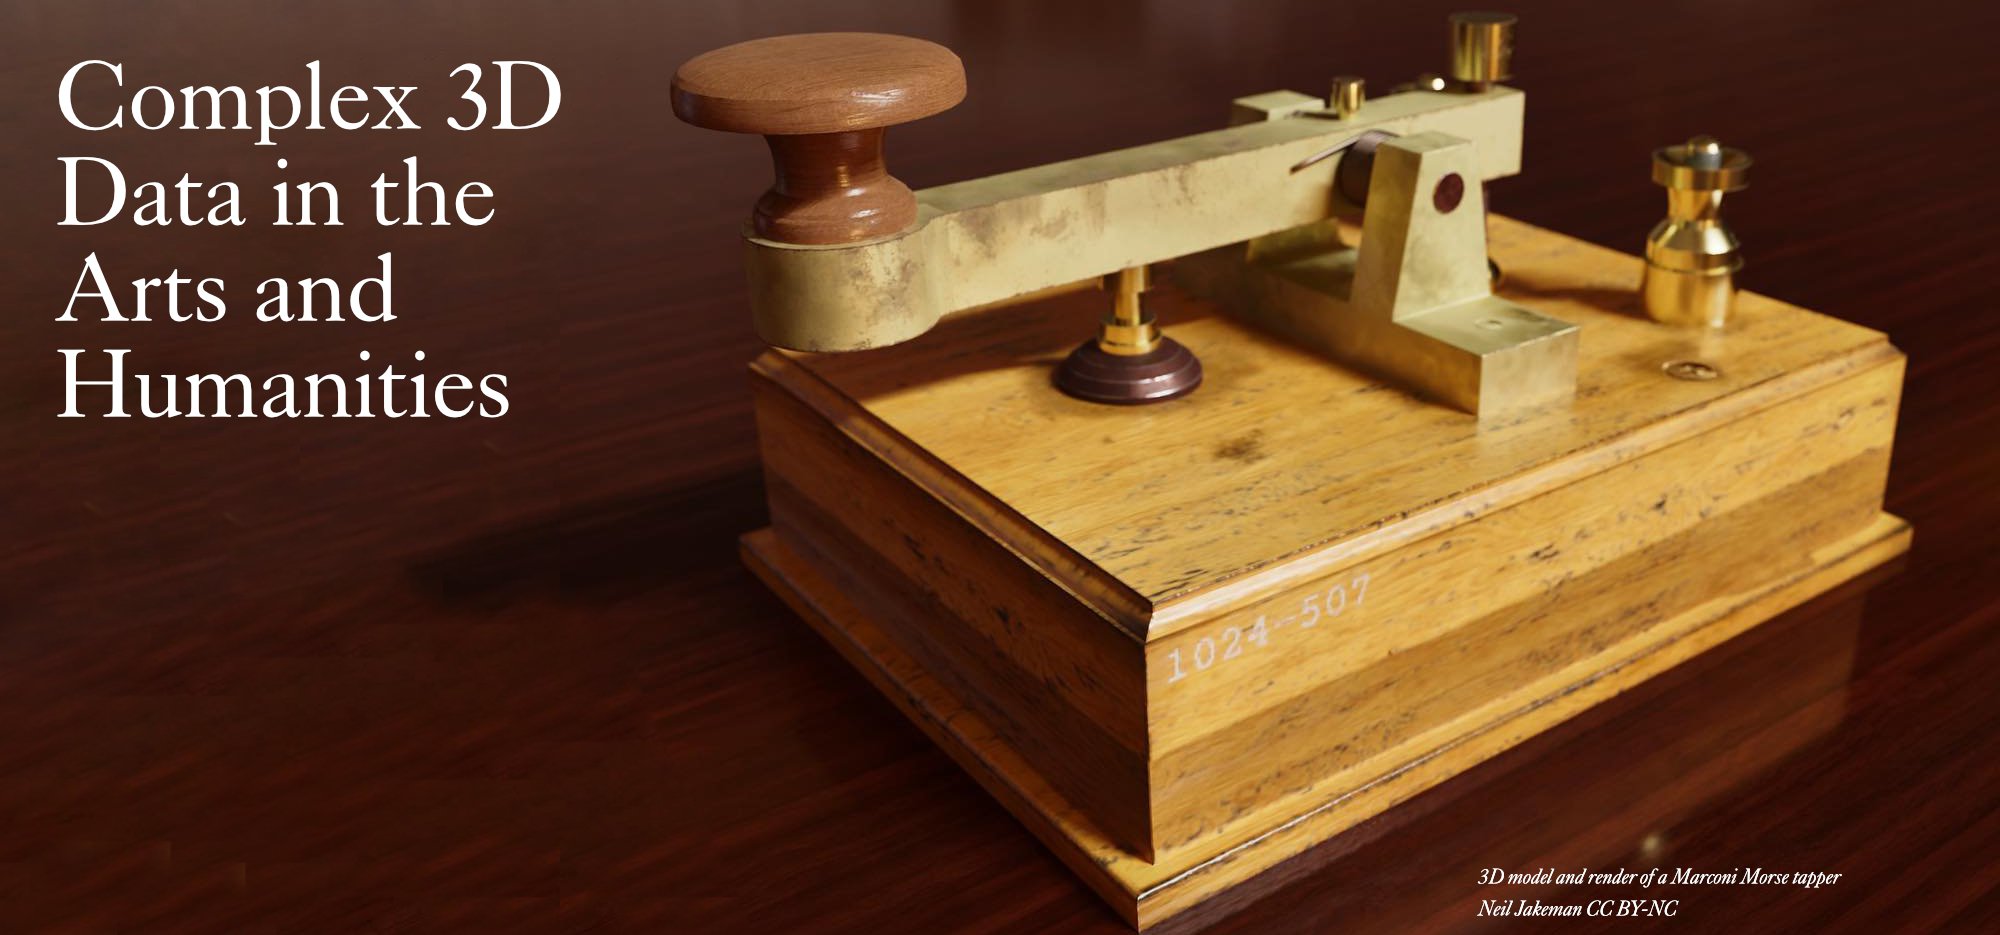 A 3D wooden box model and render of the Marconi Morse Tapper displaying the words "Complex 3D Data in Arts and Humanities"